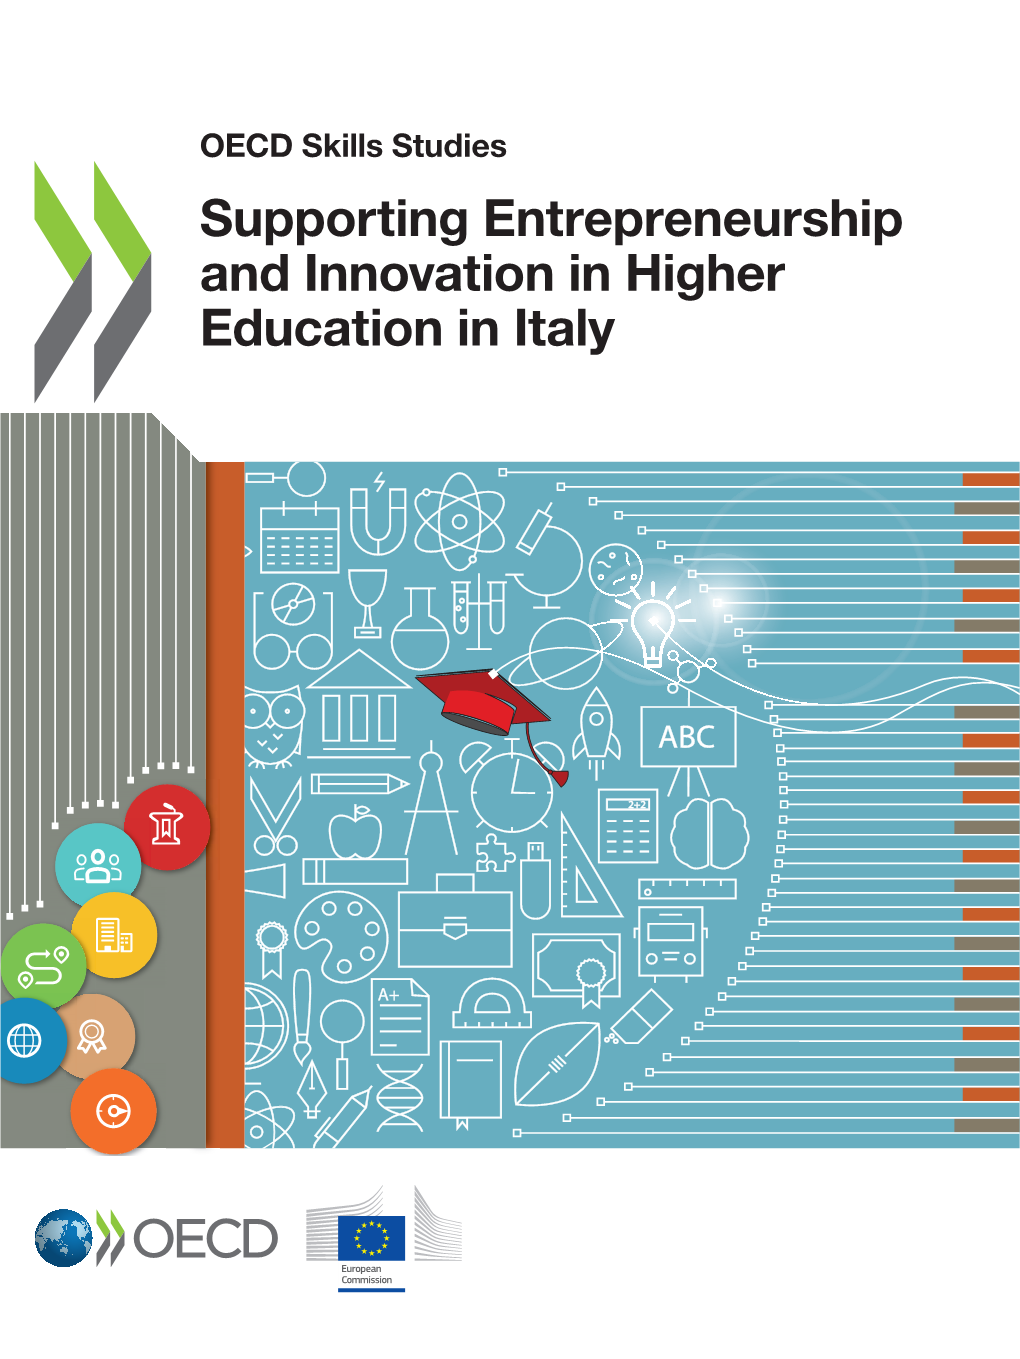 Supporting Entrepreneurship and Innovation in Higher Education in Italy OECD Skills Studies